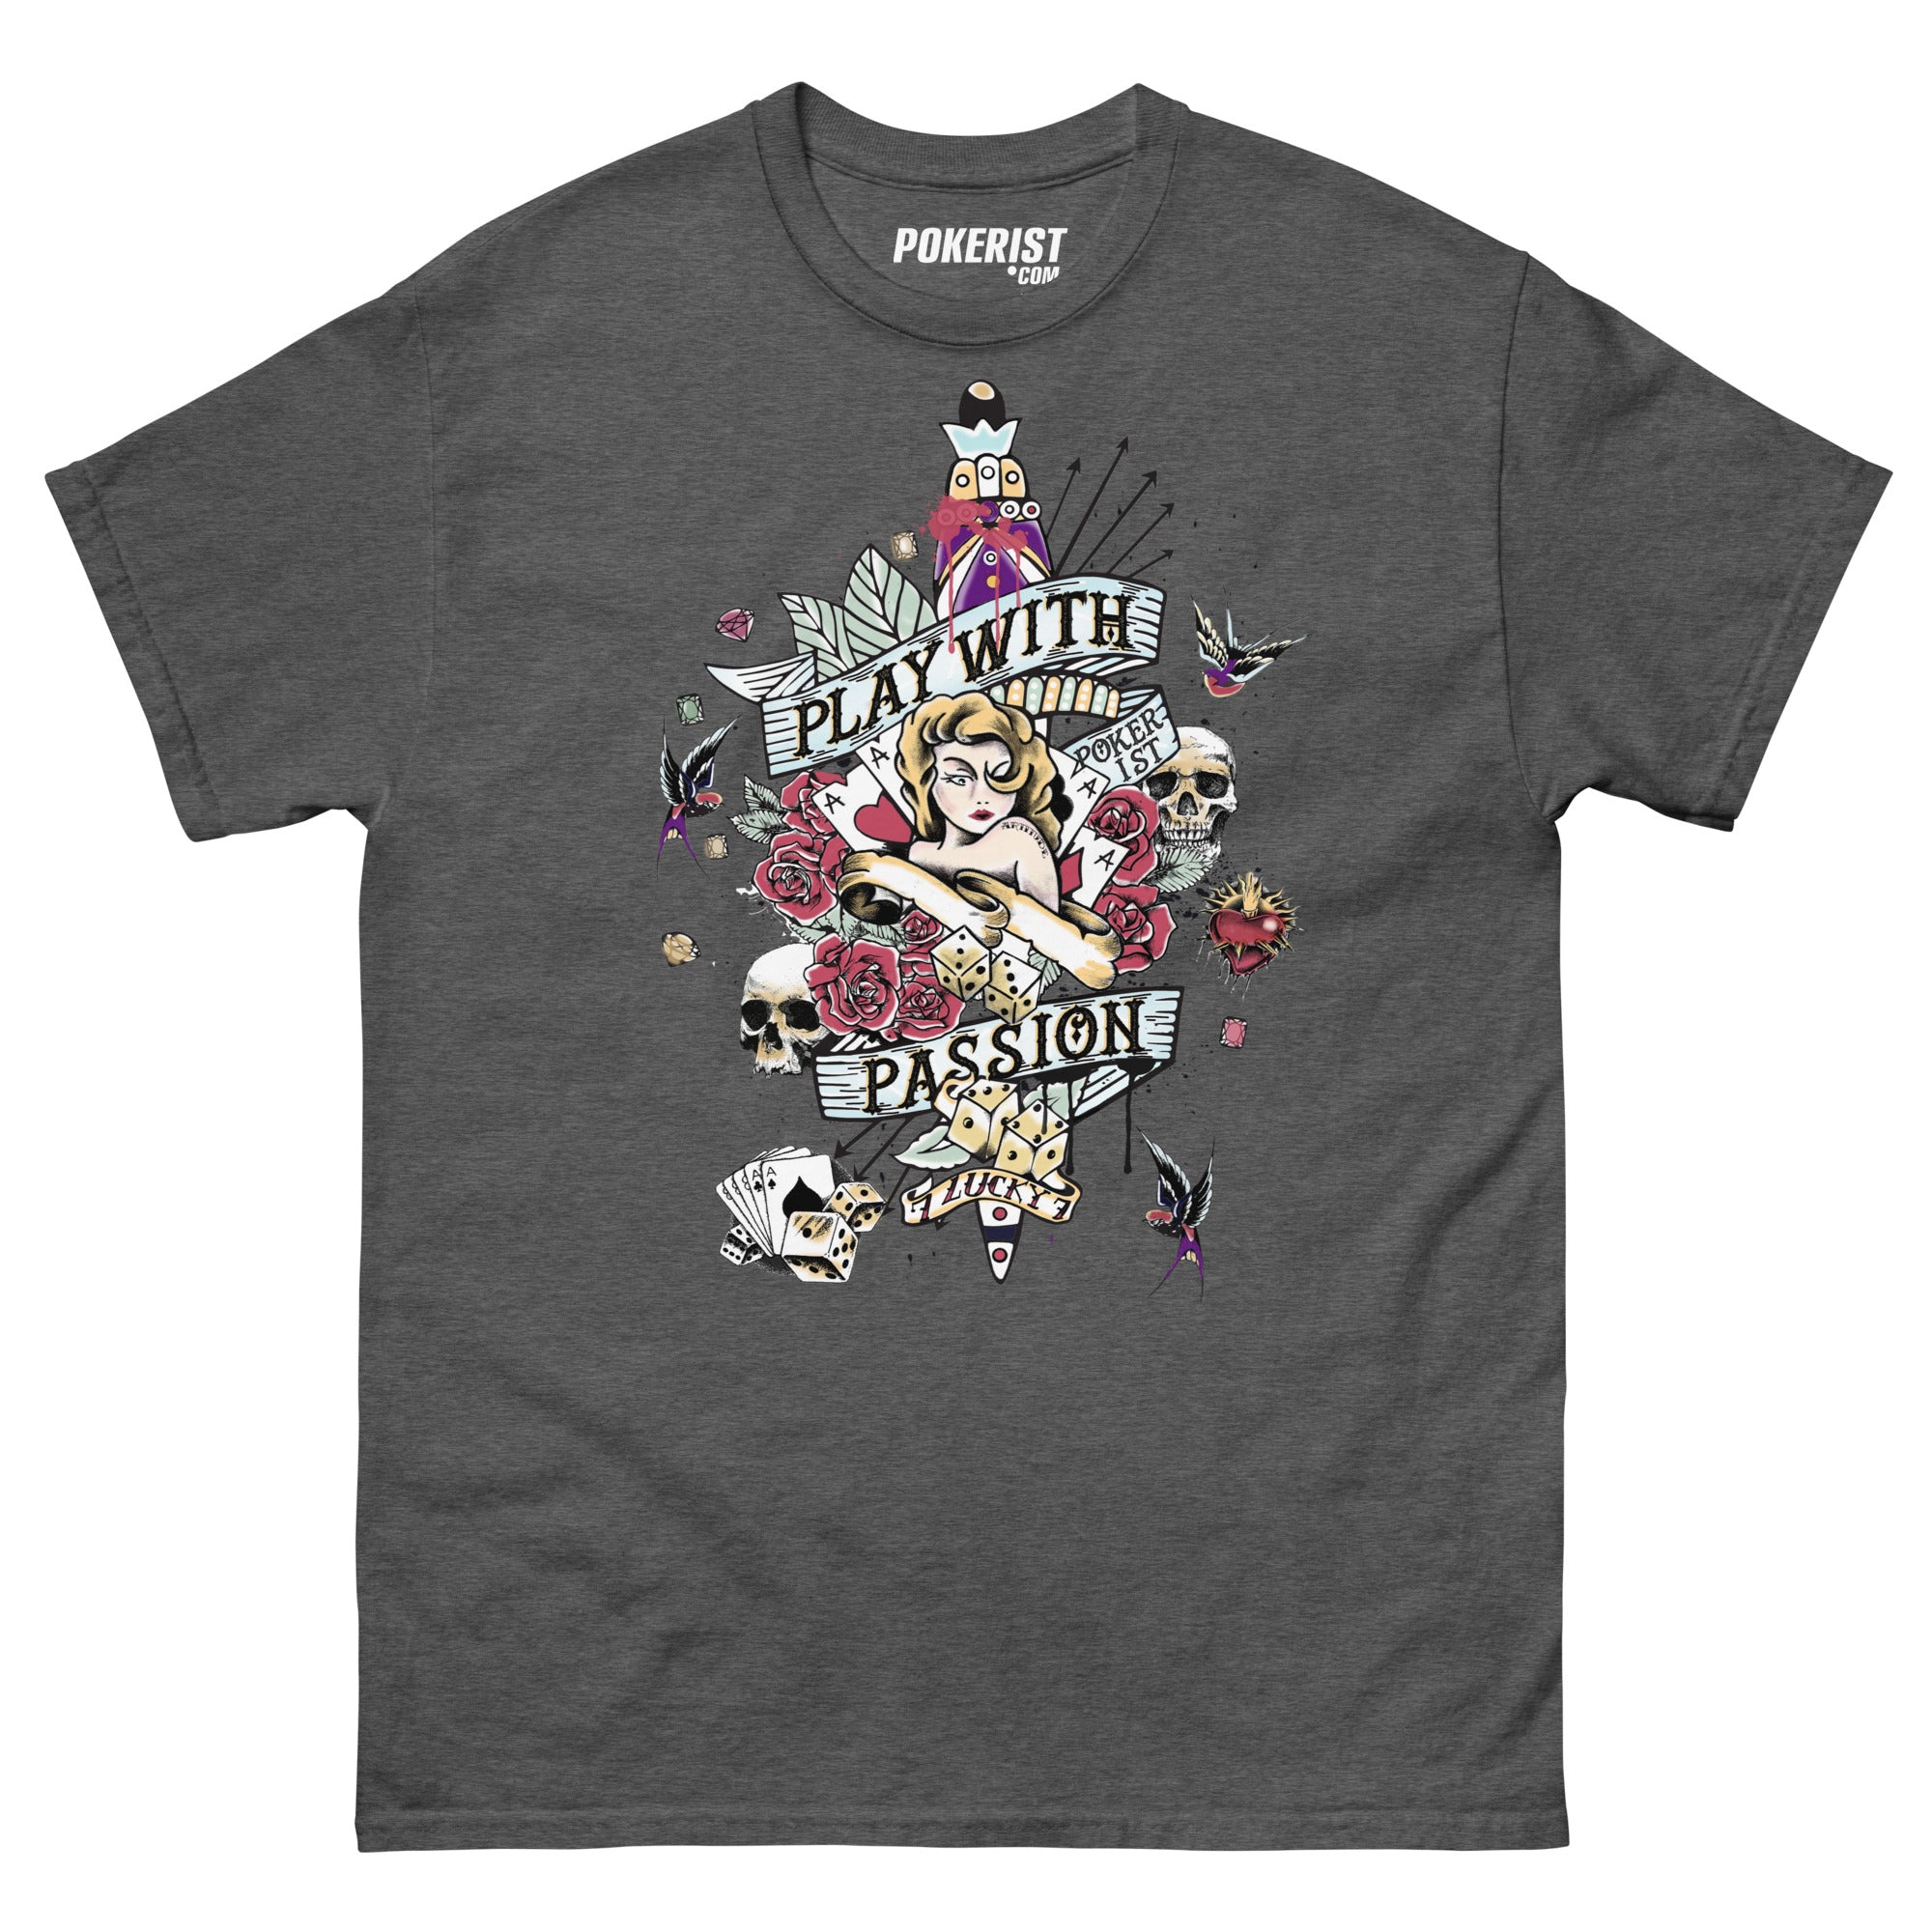 Play With Passion - Men's classic tee - Pokerist